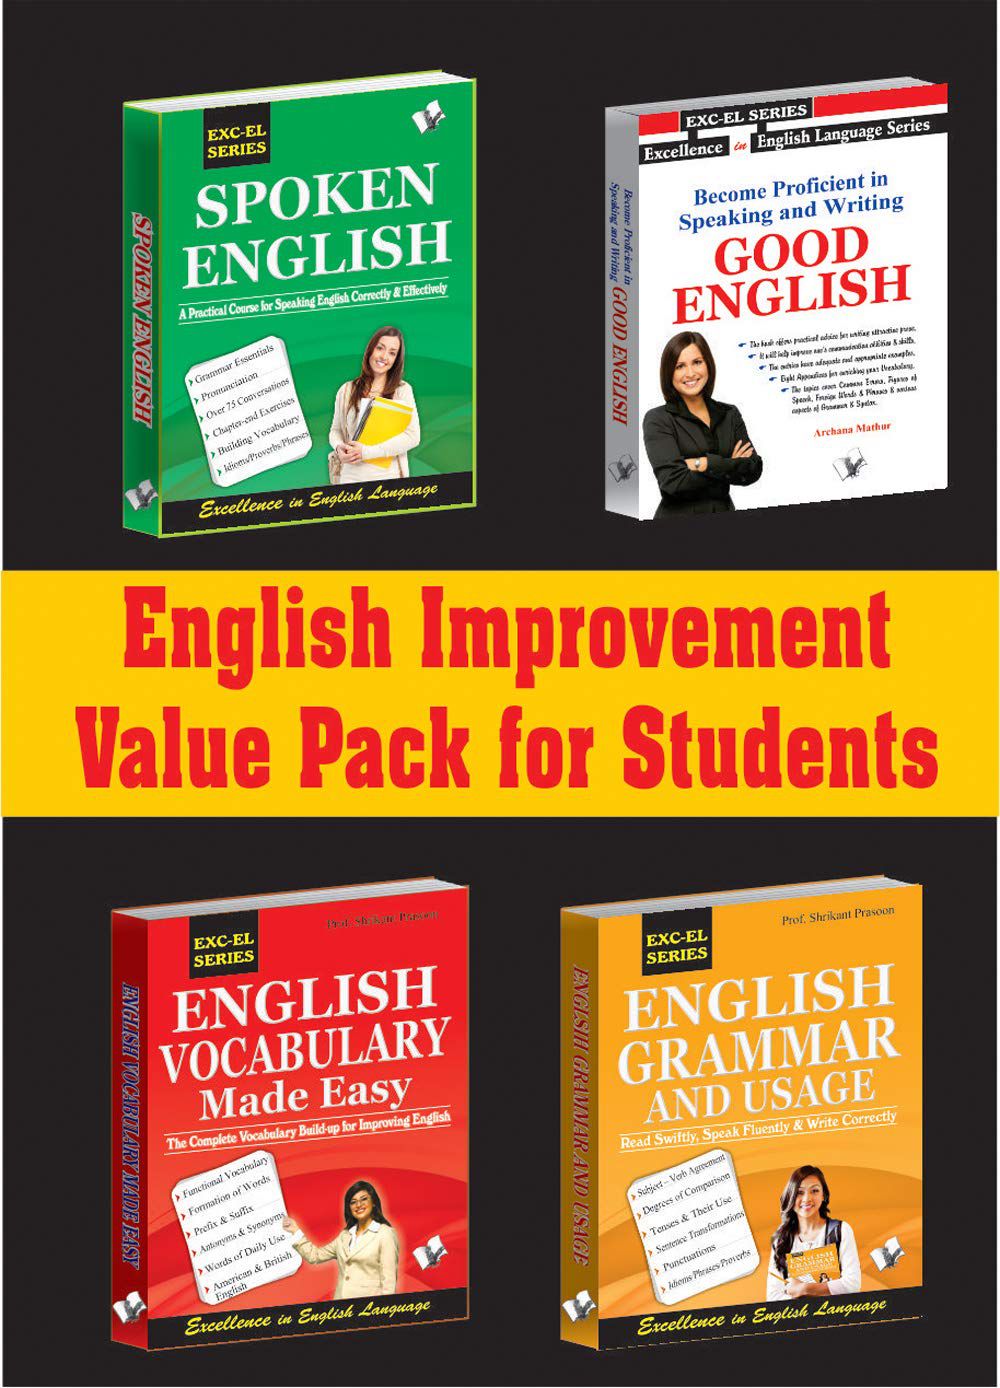     			English Improvement Value Pack for Students: Guide To Increase Vocabulary, Polish Grammar and Its Usage for Writing and Speaking Good English